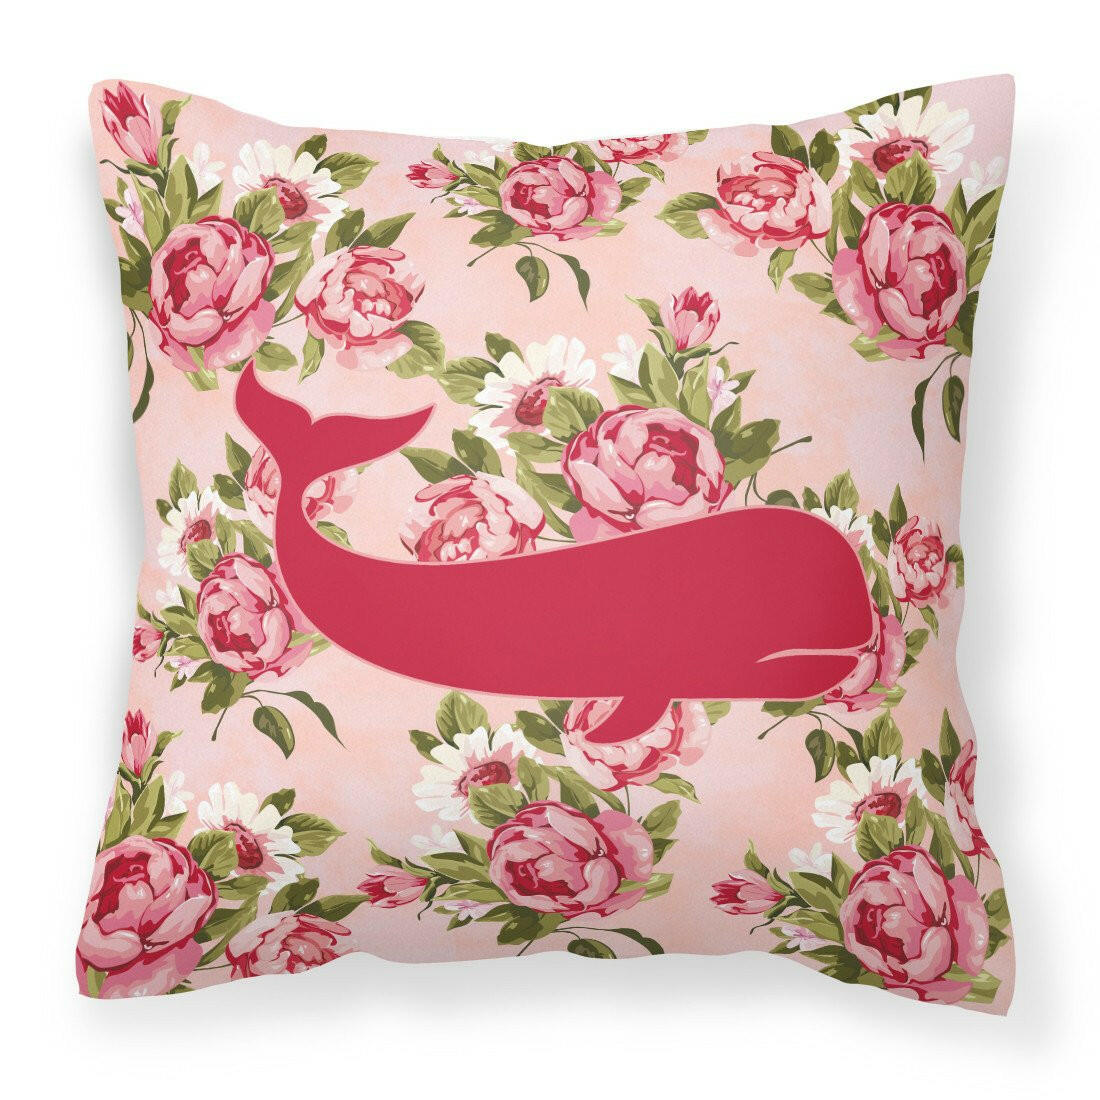 Whale Shabby Chic Pink Roses  Fabric Decorative Pillow BB1021-RS-PK-PW1414 - the-store.com